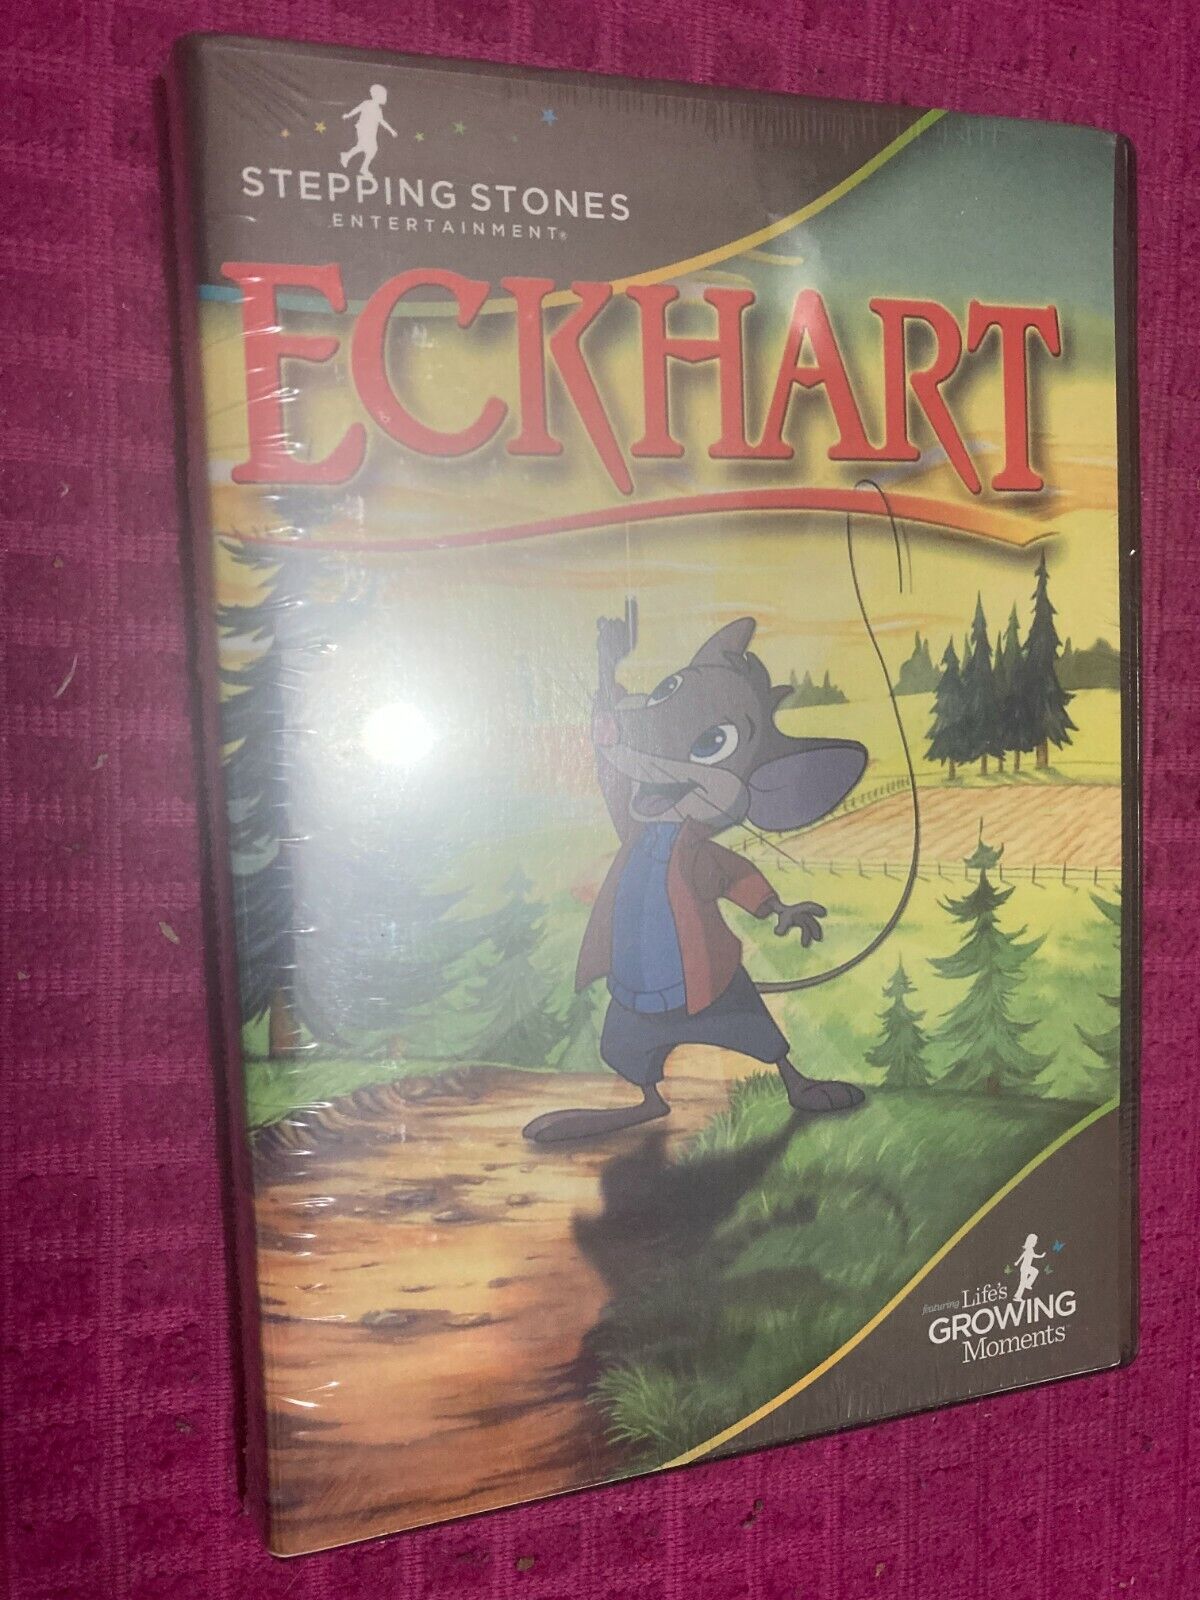 NEW! Eckhart (DVD) STEPPING STONES ENTERTAINMENT - SHIP FAST - ANIMATION -  MOUSE